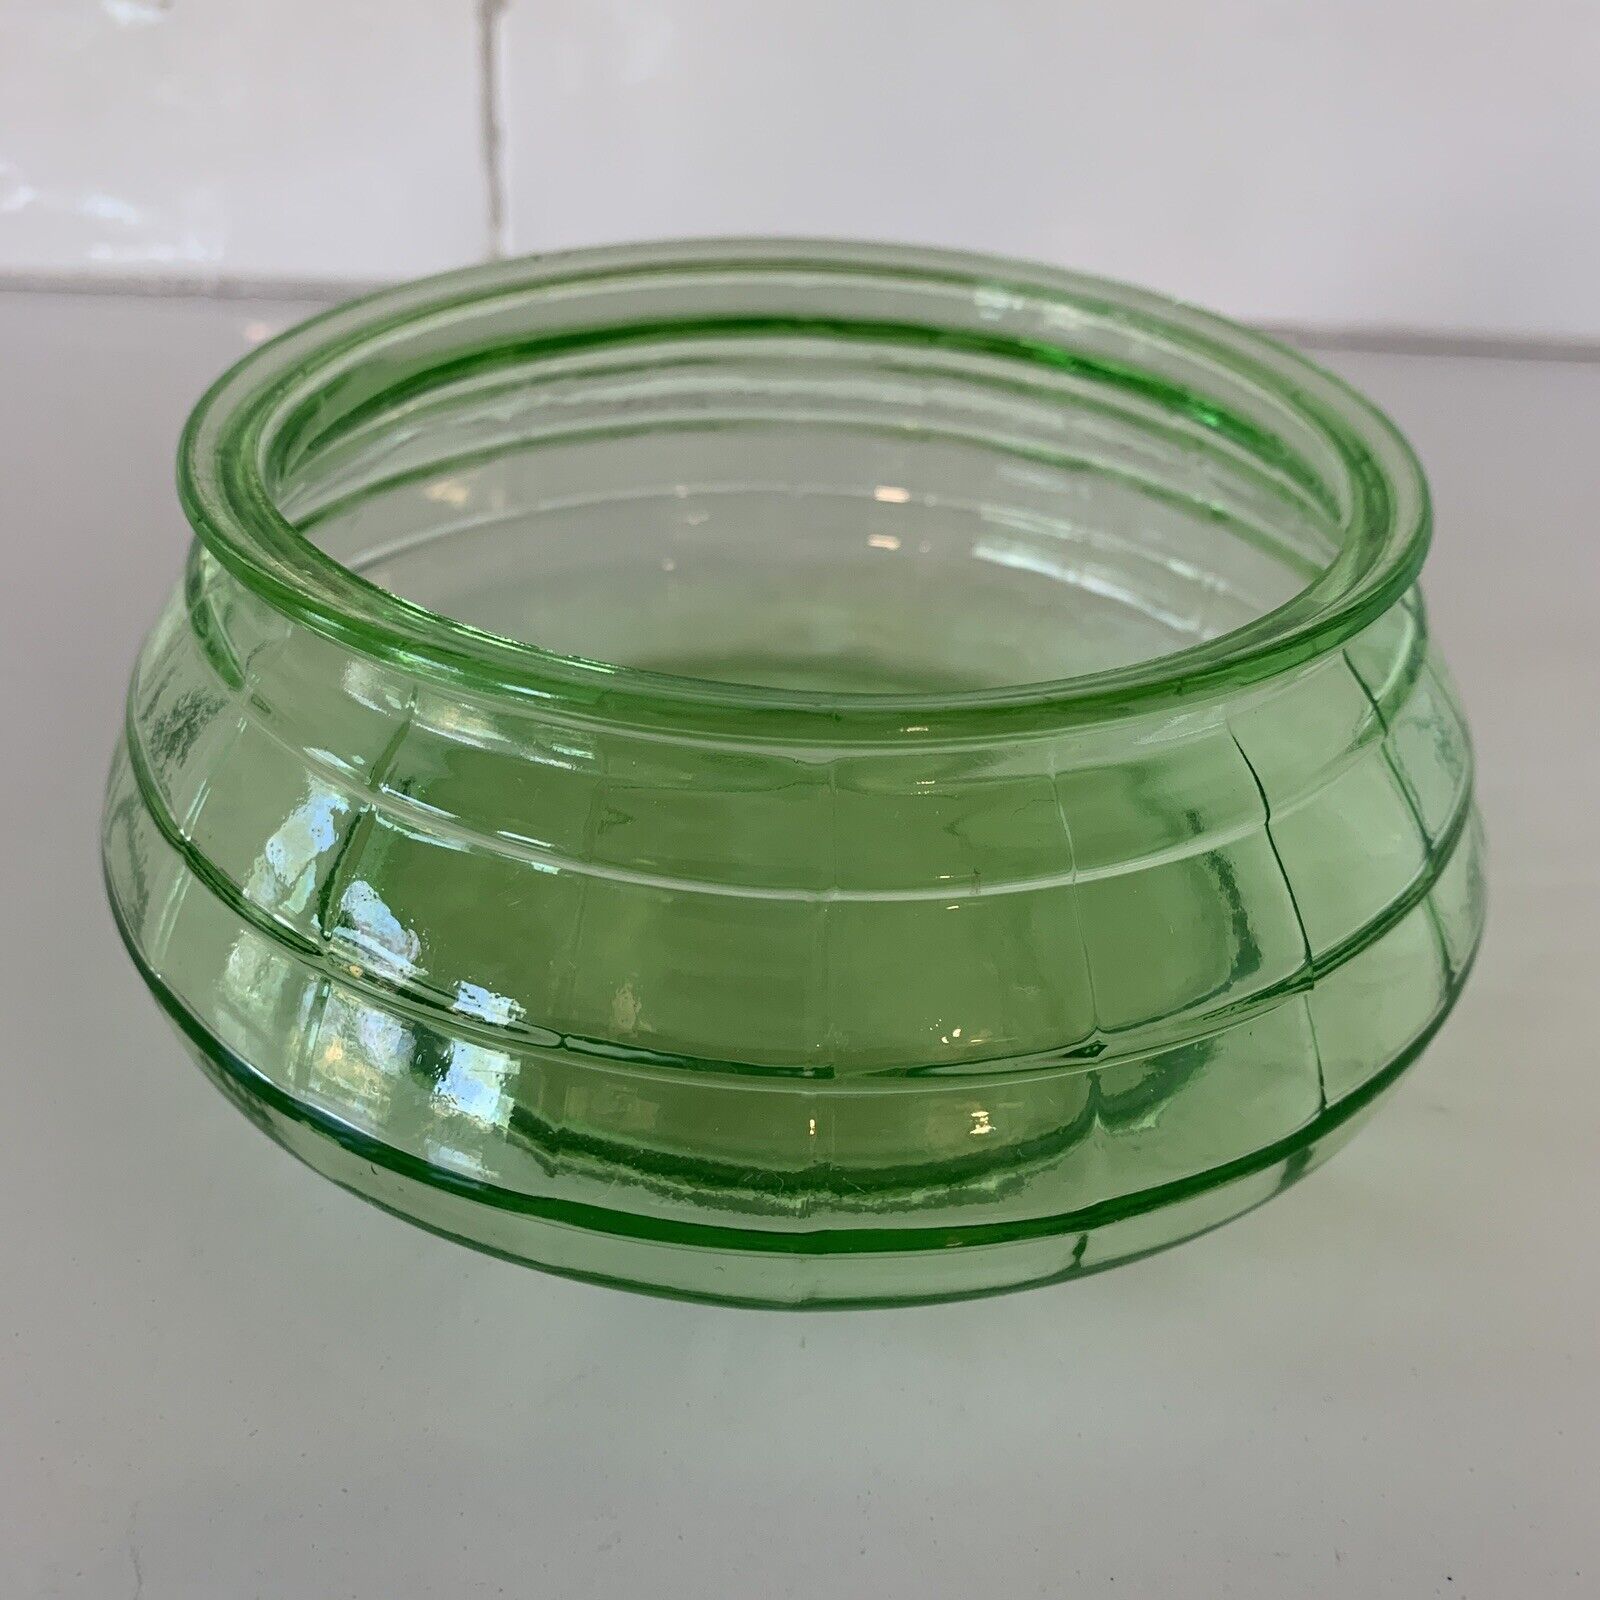 Vintage Green Depression Glass Bowl Candy Nut Dish 1930s